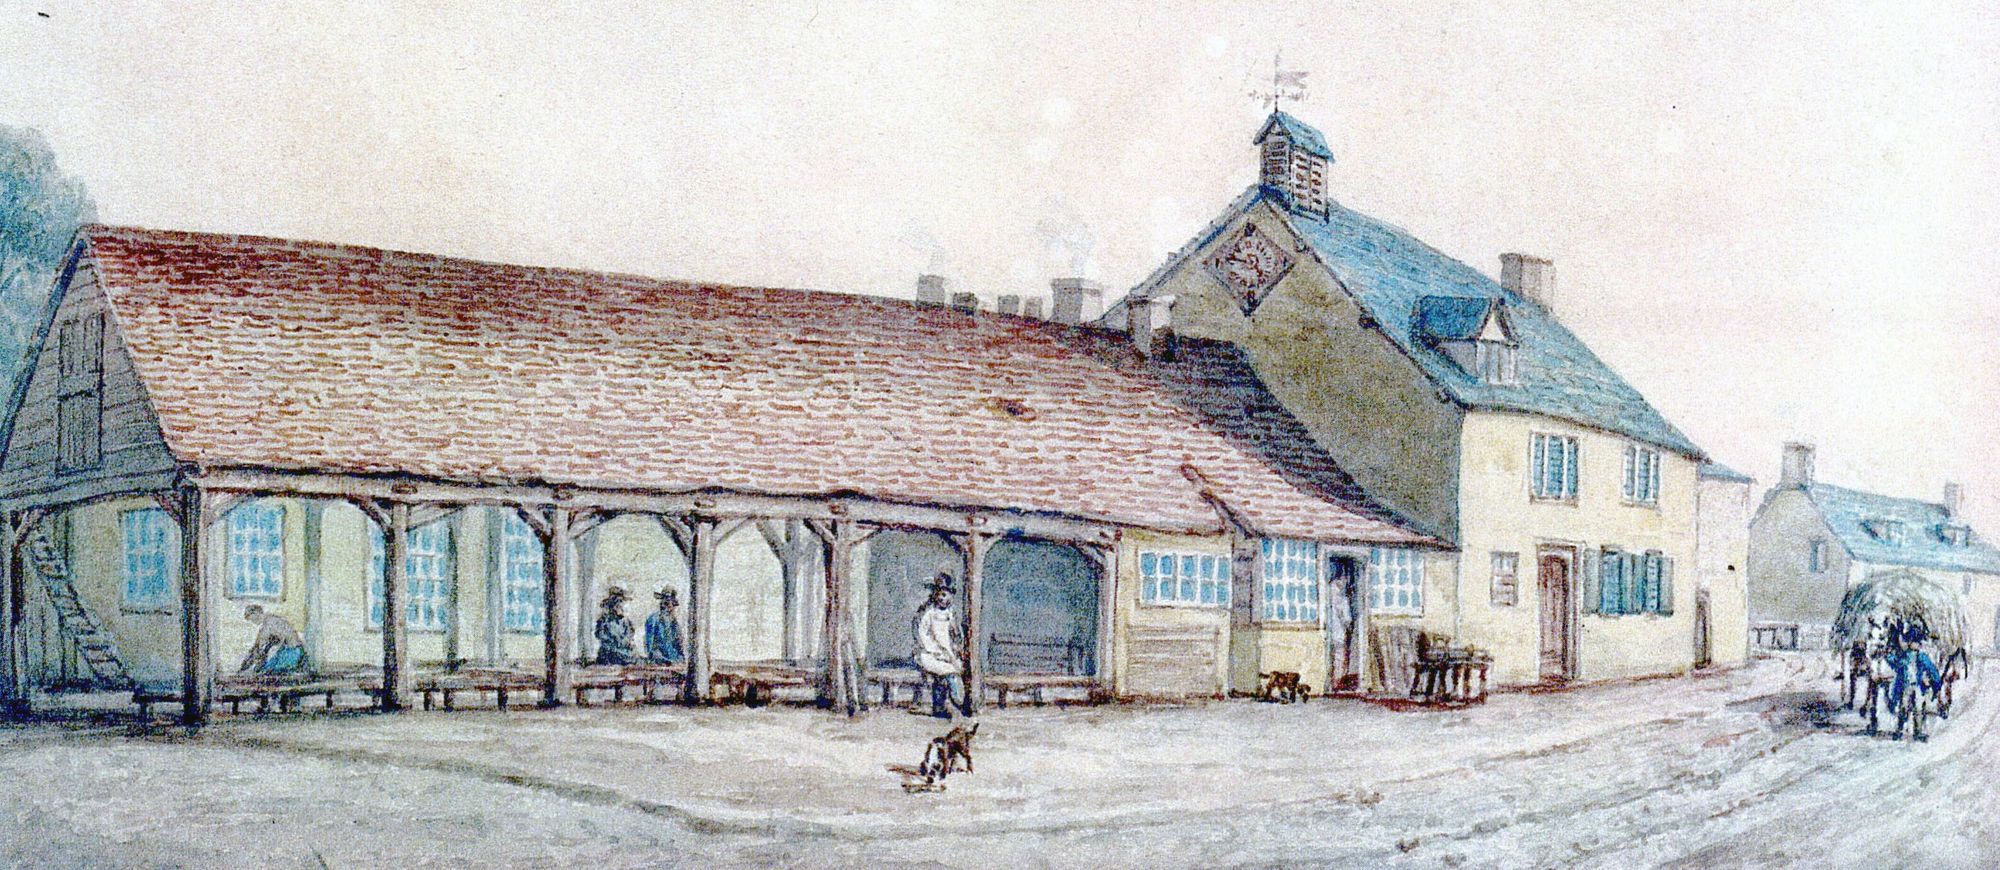 The Town House and Shambles on Market Square in the 1810s.